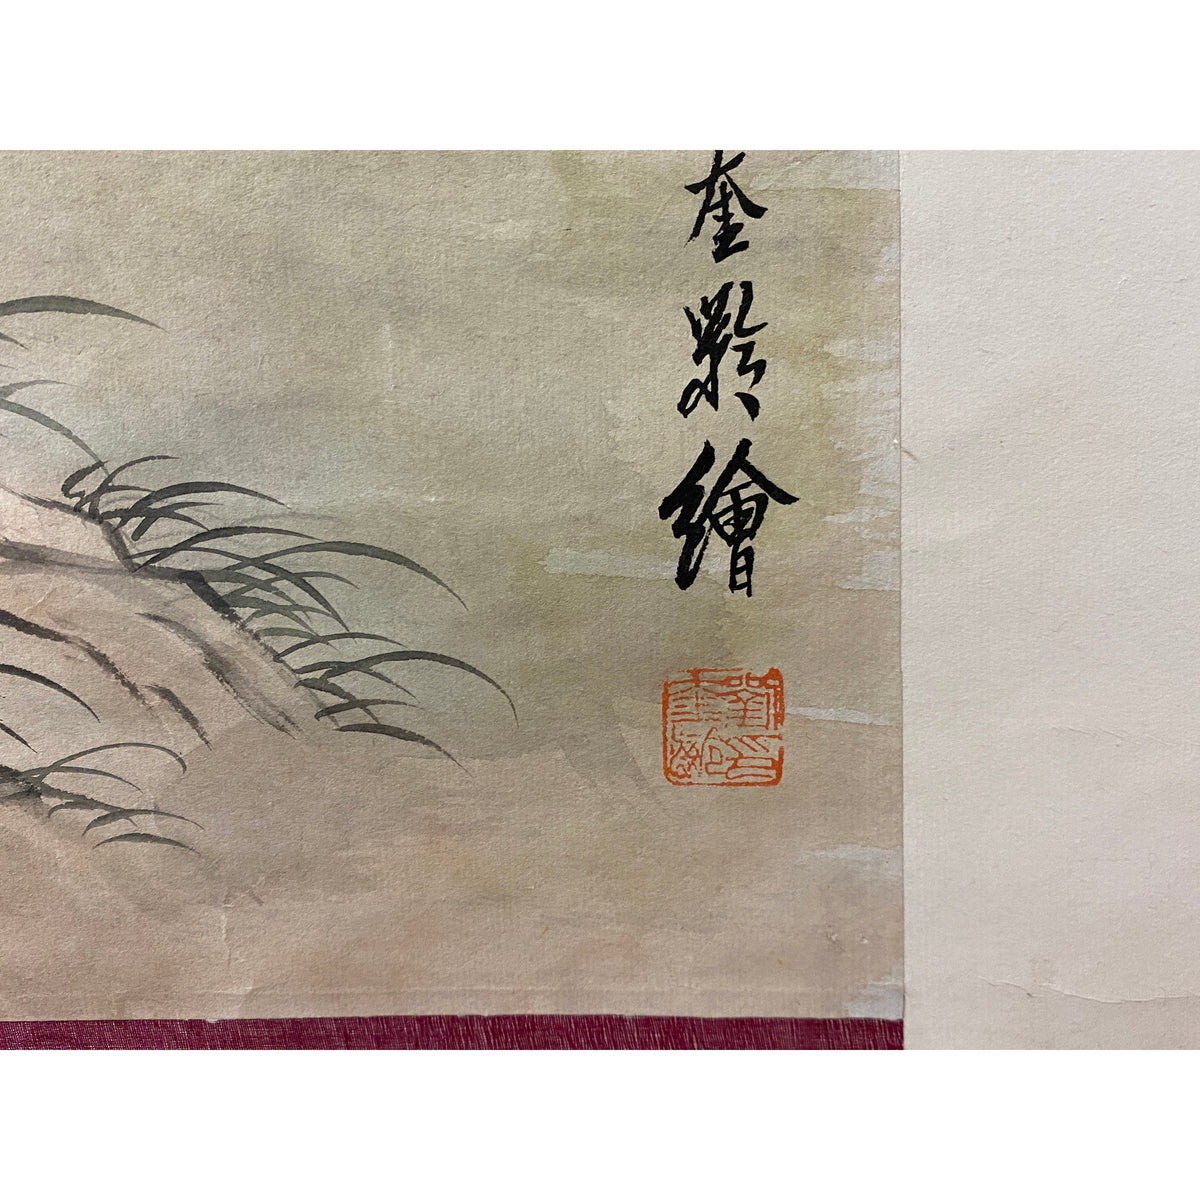 Chinese Calligraphy Ink Writing Scroll Painting Wall Art